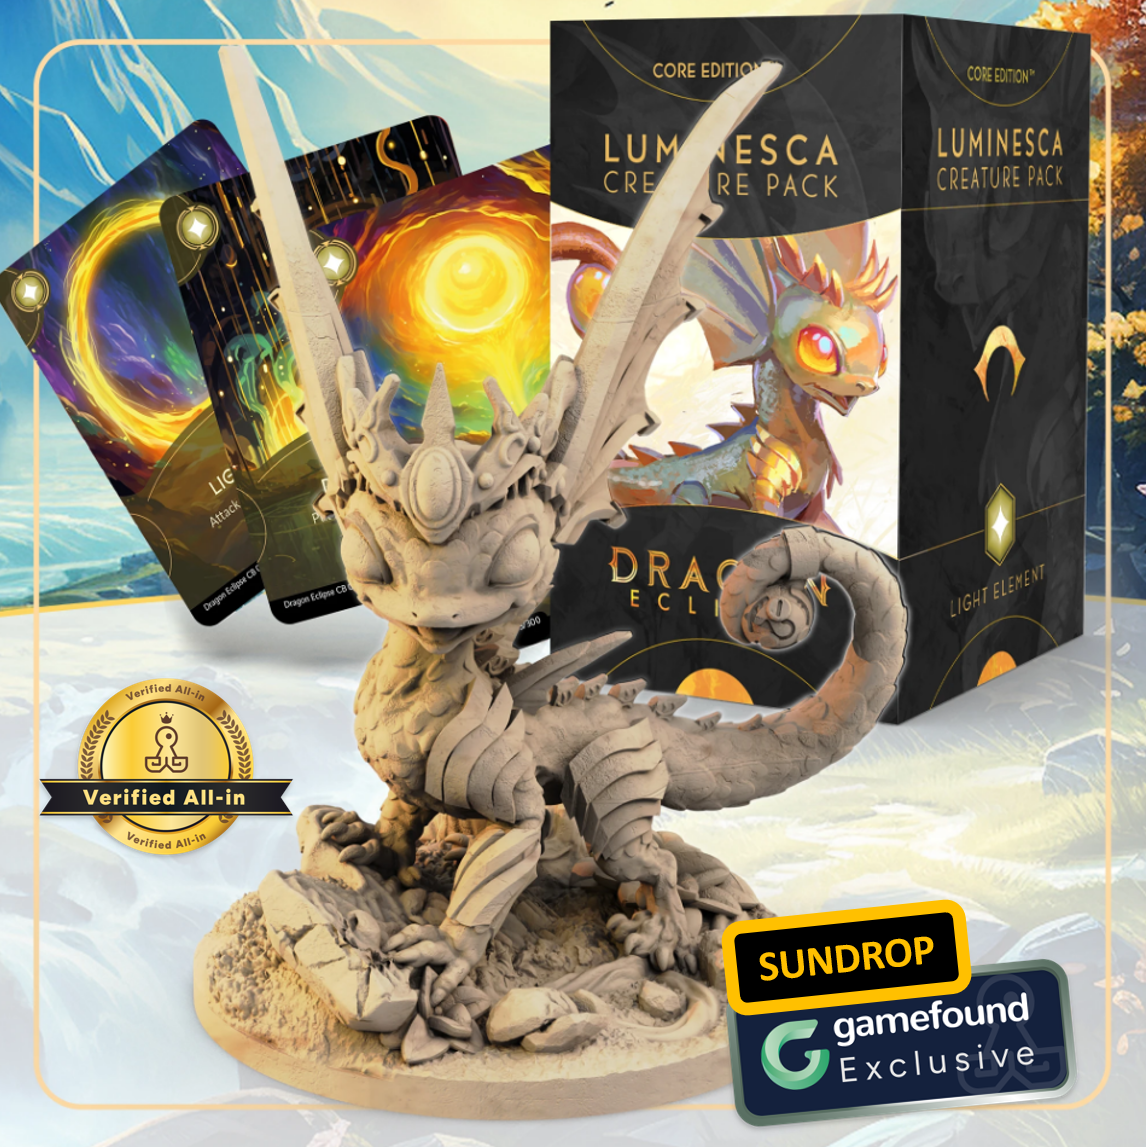 Gamefound Exclusive Dragon Eclipse Board Game Luminesca Creature Pack Expansion, Sundrop Edition